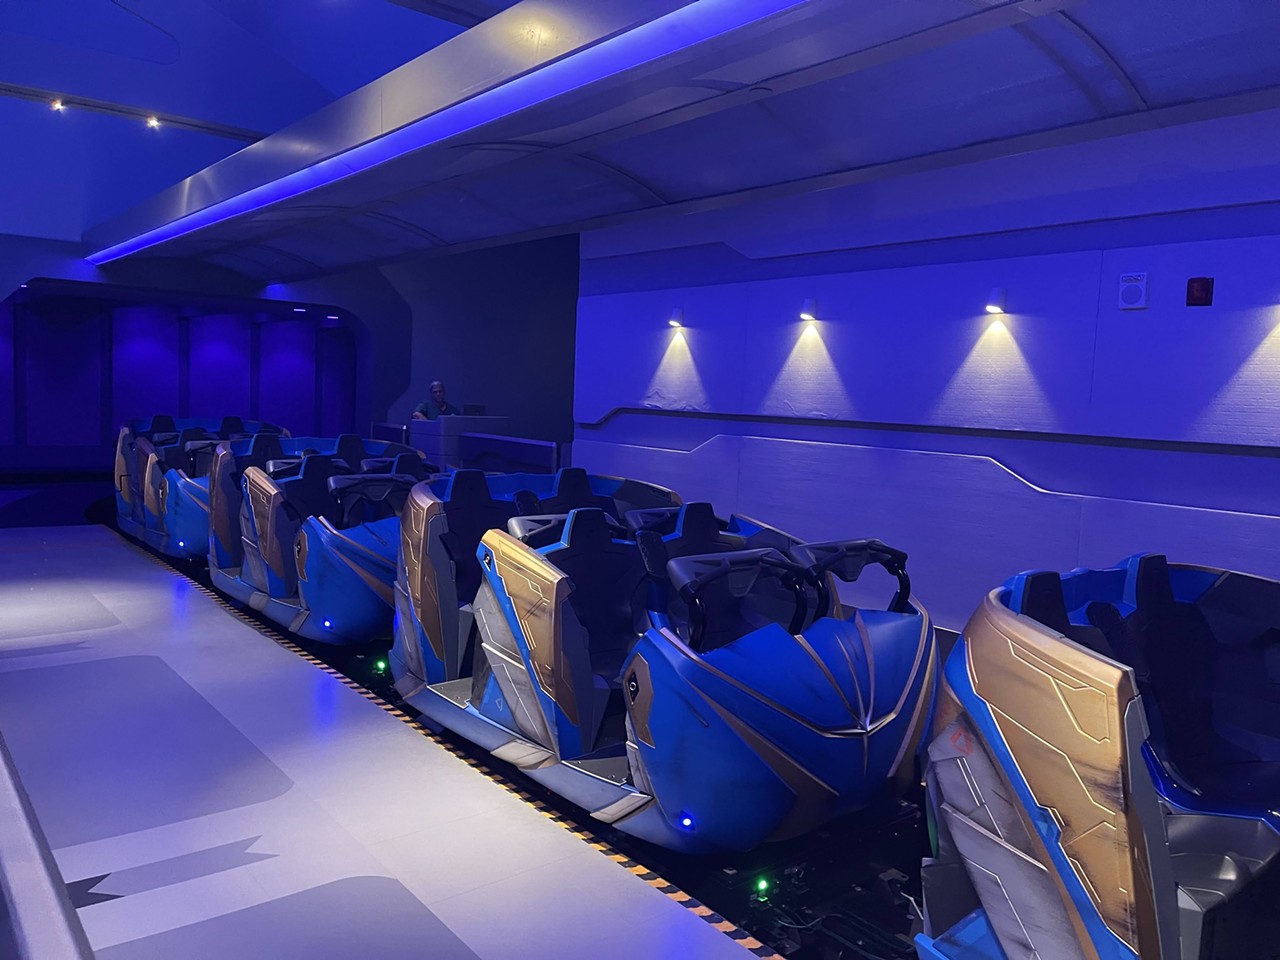 Look inside the recently opened Guardians of the Galaxy: Cosmic Rewind ride at Epcot